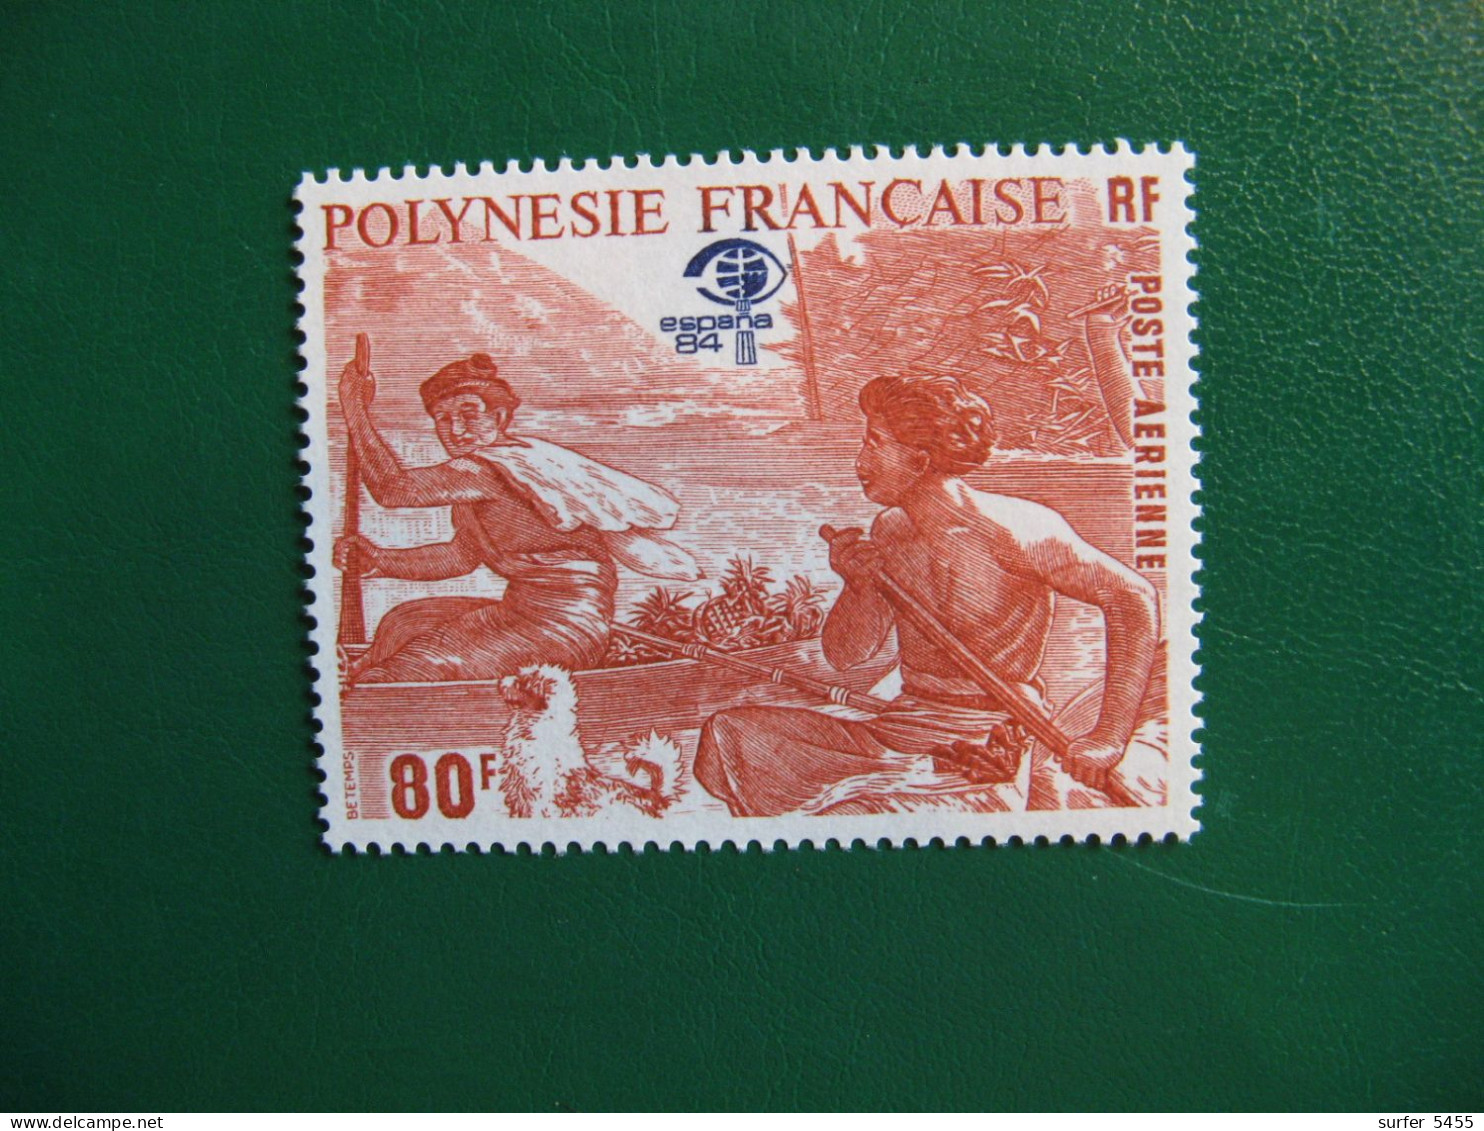 P0LYNESIE PO AERIENNE N° 182 TIMBRE NEUF ** LUXE - MNH - SERIE COMPLETE - FACIALE 0,67 EURO - Neufs